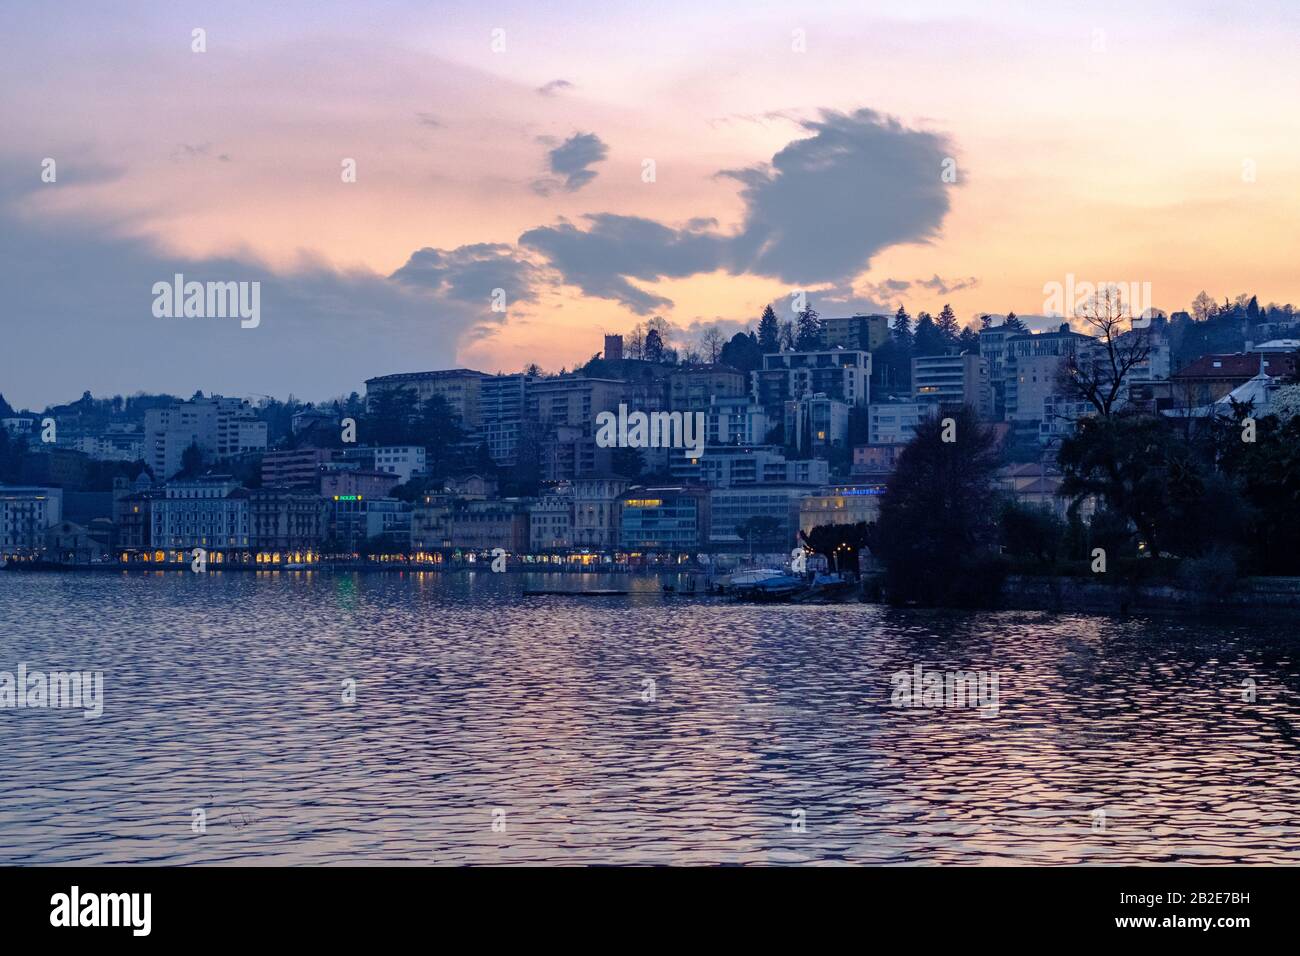 View across Lake Lugano at dusk in the spring of 2019. Stock Photo